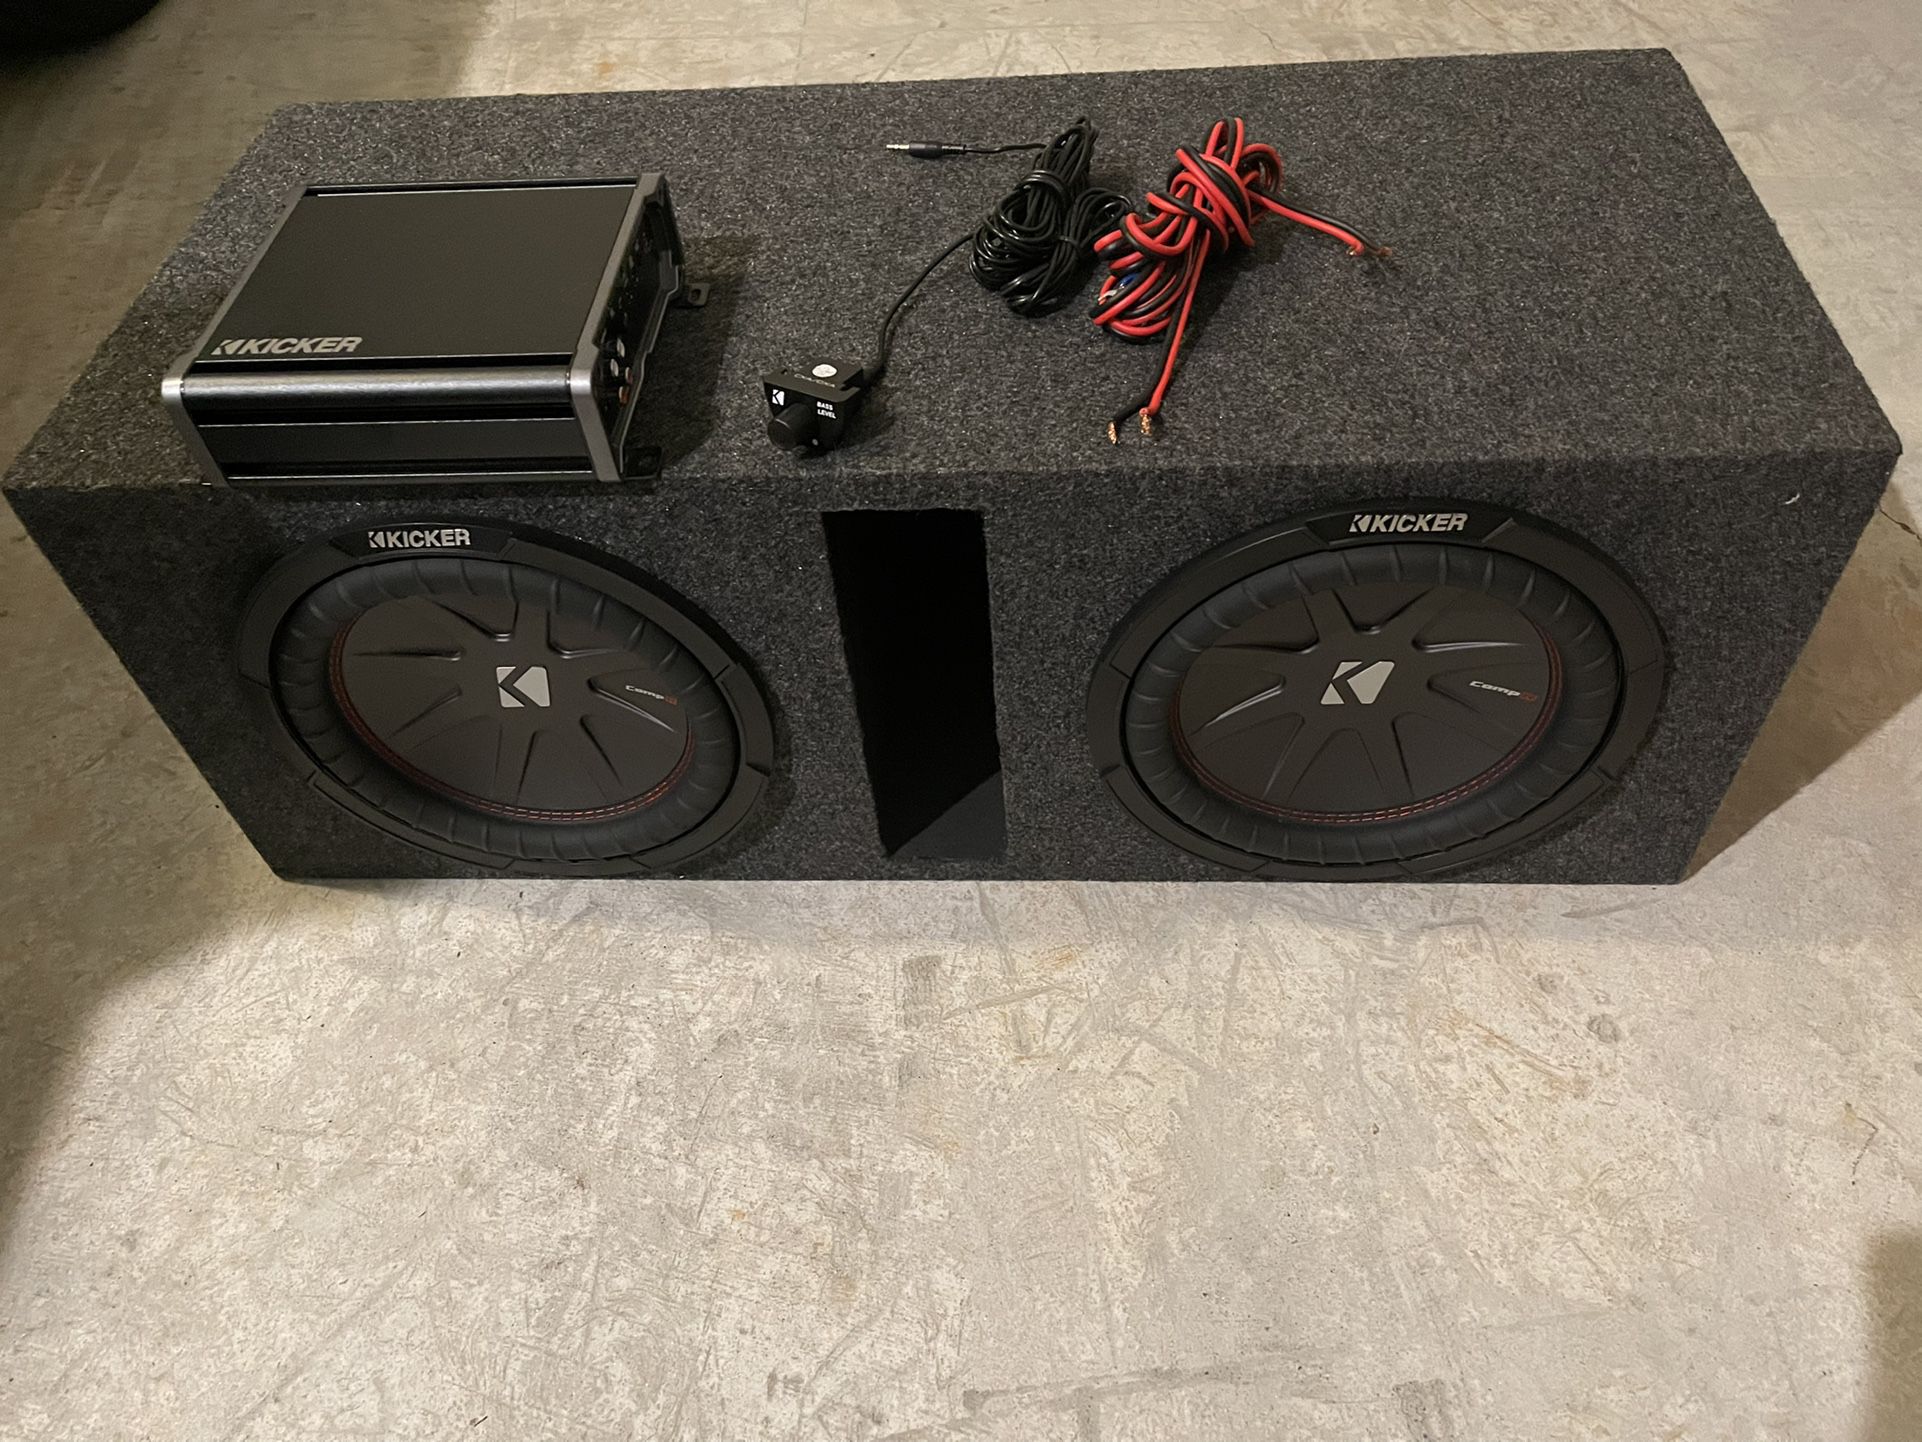 Kicker Comp R With Kicker Amplifier and Sub-Woofer Controller(Price Negotiable )